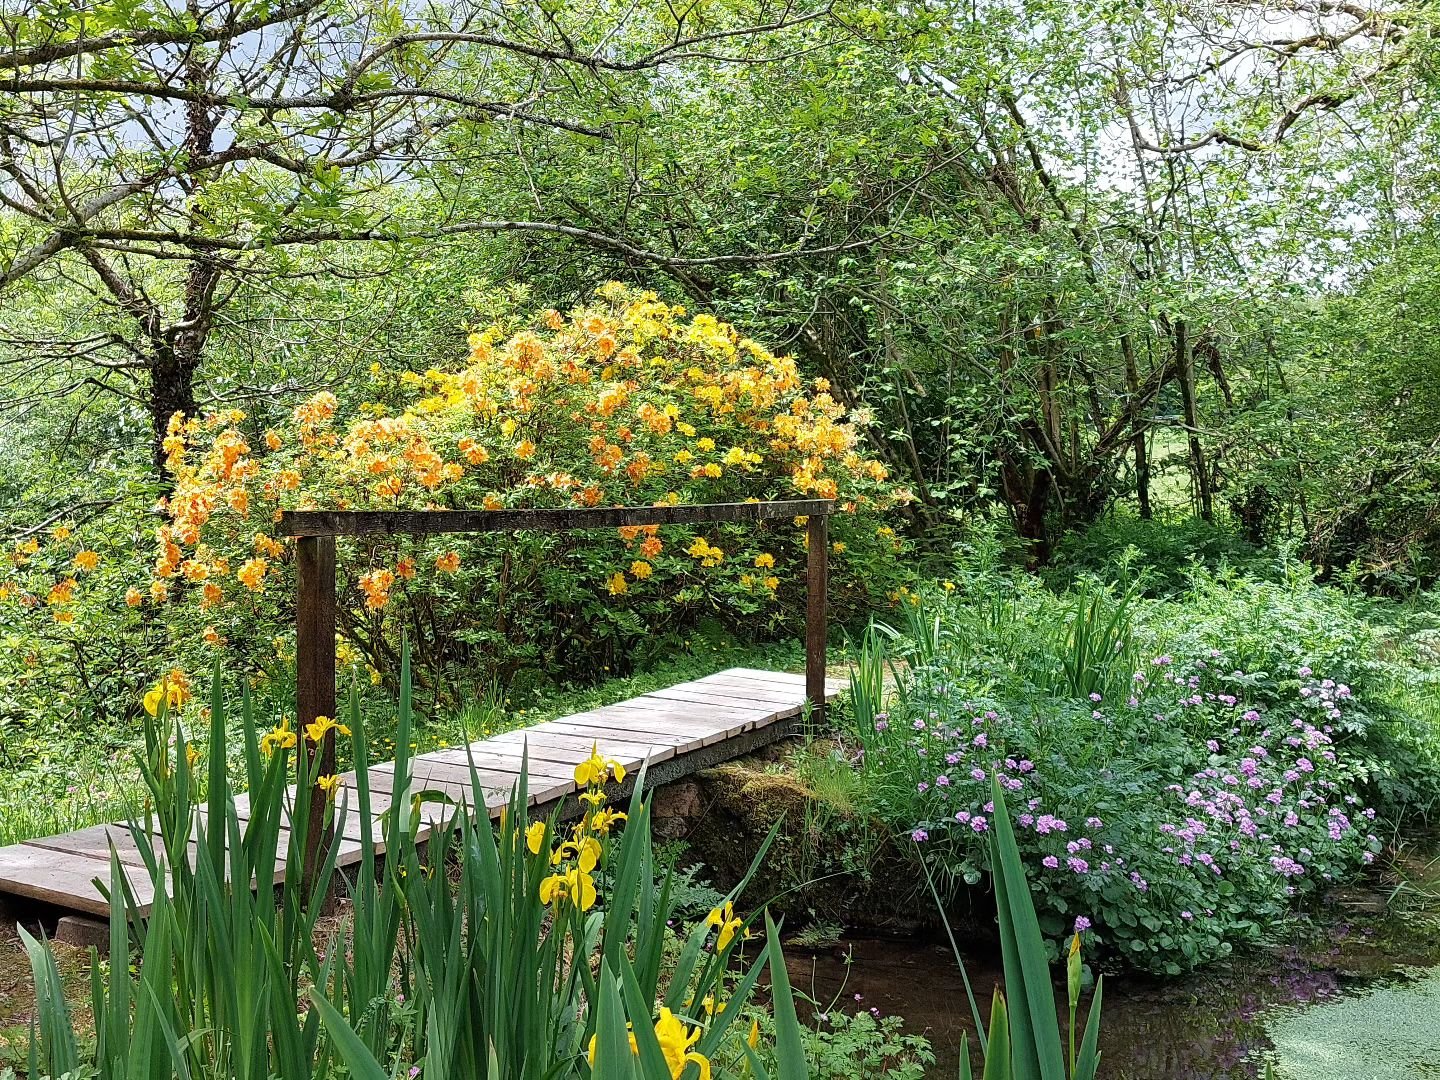 Flag irises, cuckoo flowers and scented azaleas by the top pond at Lukesland. Come and wander....
Lukesland is open Suns,  Weds and Bank Hols 11am to 5pm till 9th June.  Full details at www.lukesland.co.uk 

#devongardens #devon #devonlife #gardens #